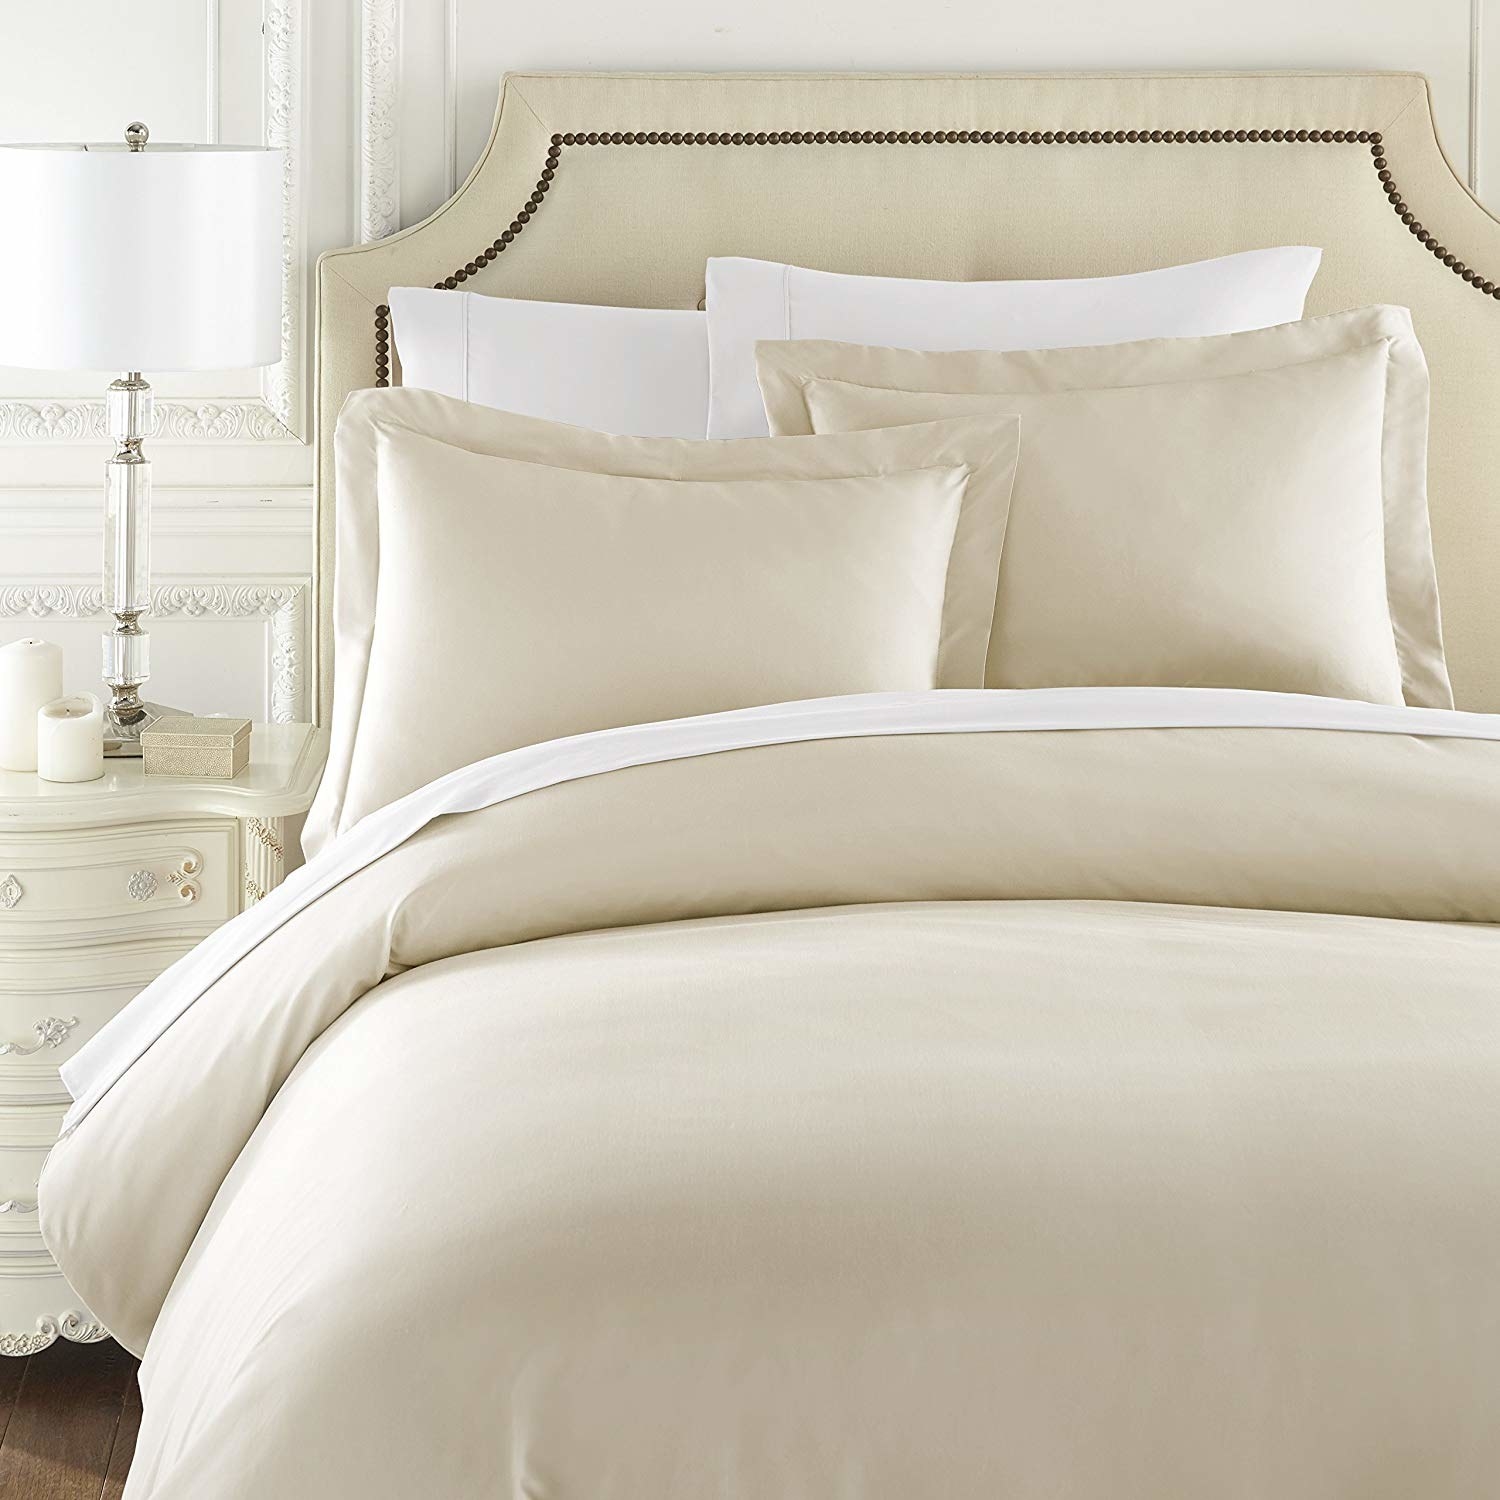 The duvet cover in cream on a plush bed. 